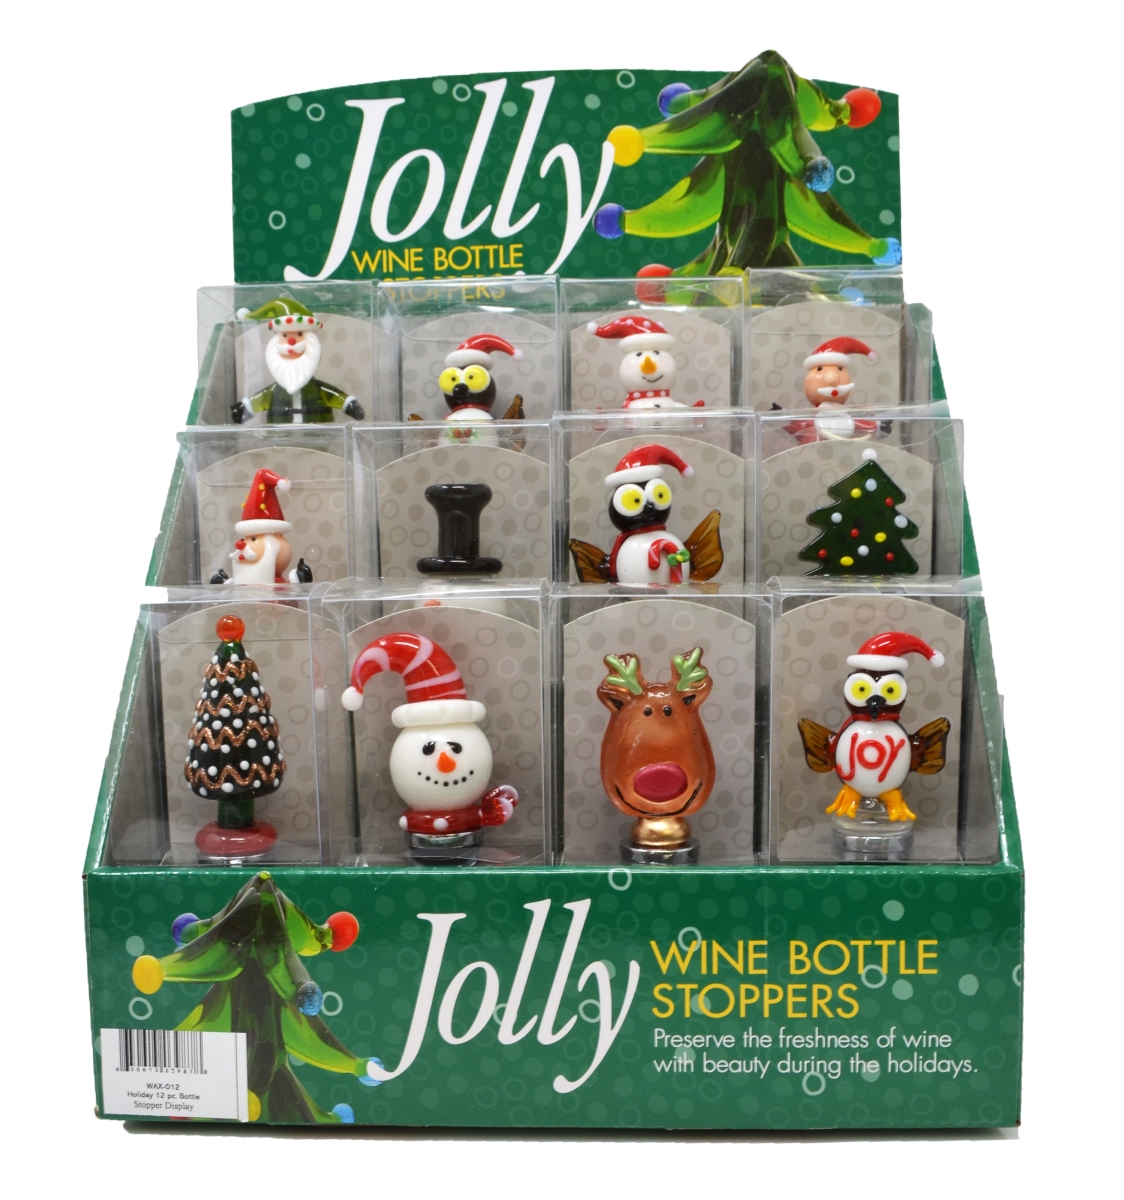 Wax-012 Holiday Bottle Stopper Display - 12 Piece